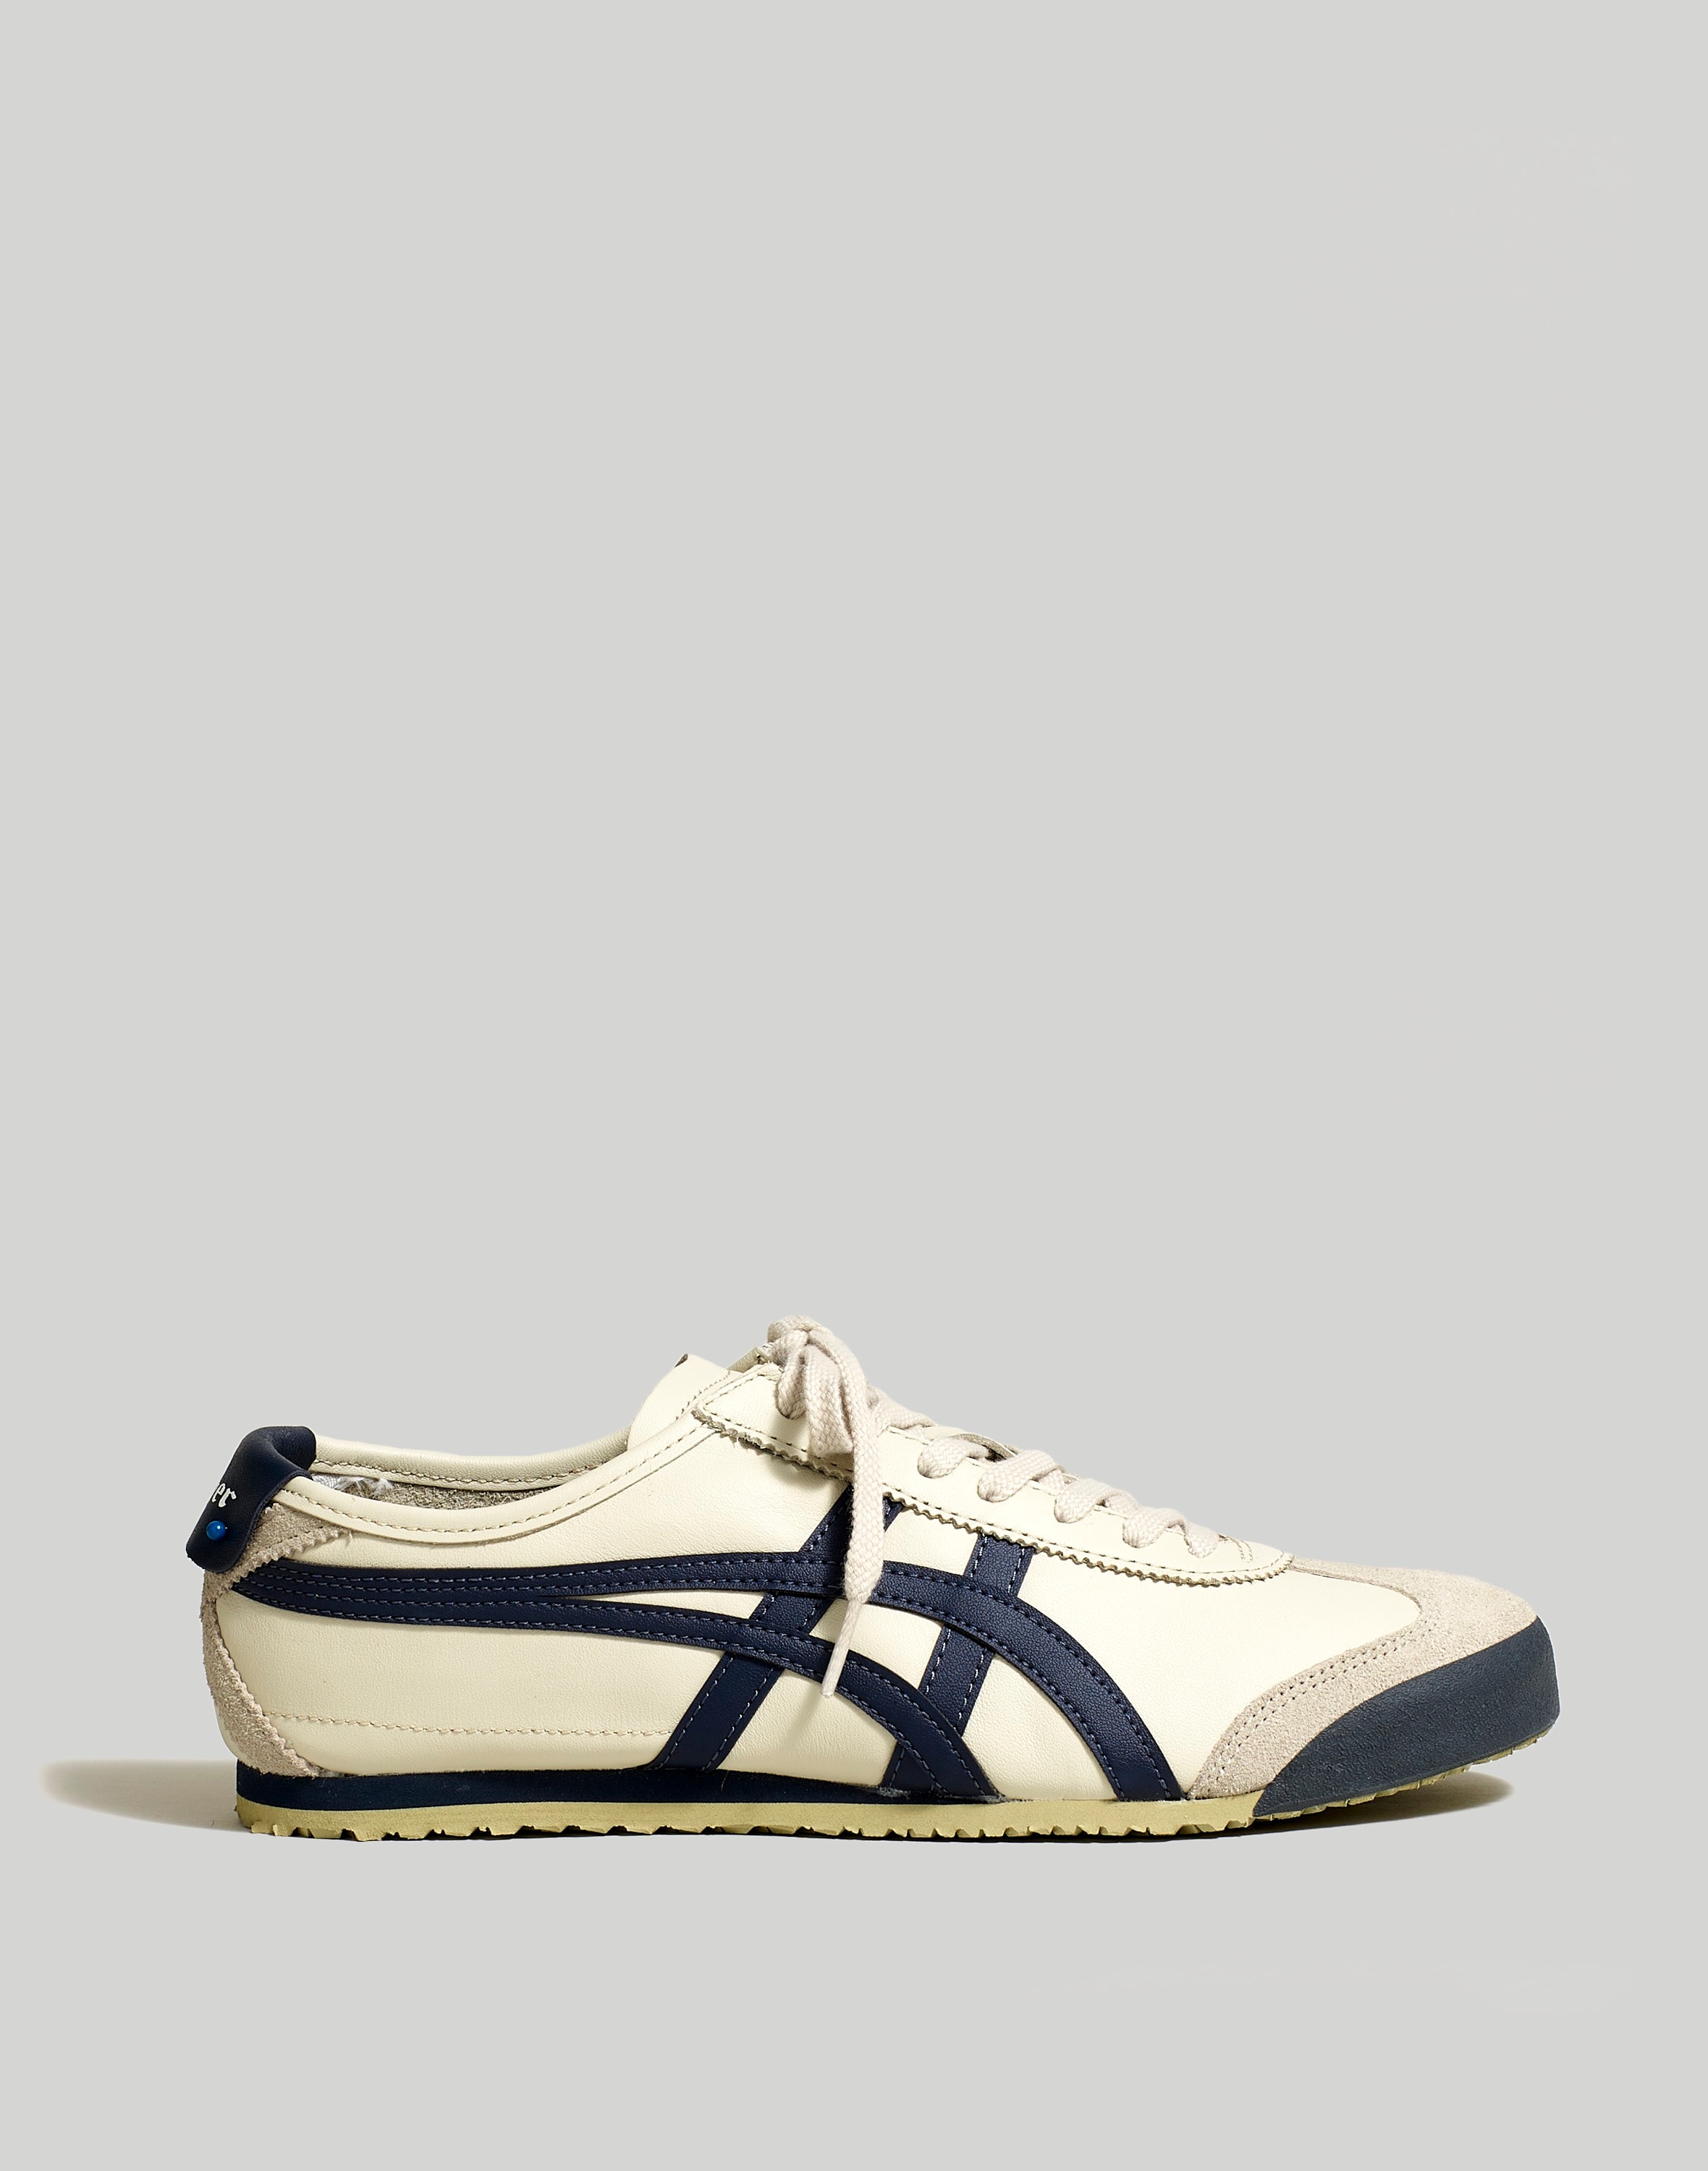 Onitsuka Tiger has been a timeless favourite. #OnitsukaTigerTricolor # OnitsukaTiger #MEXICO66